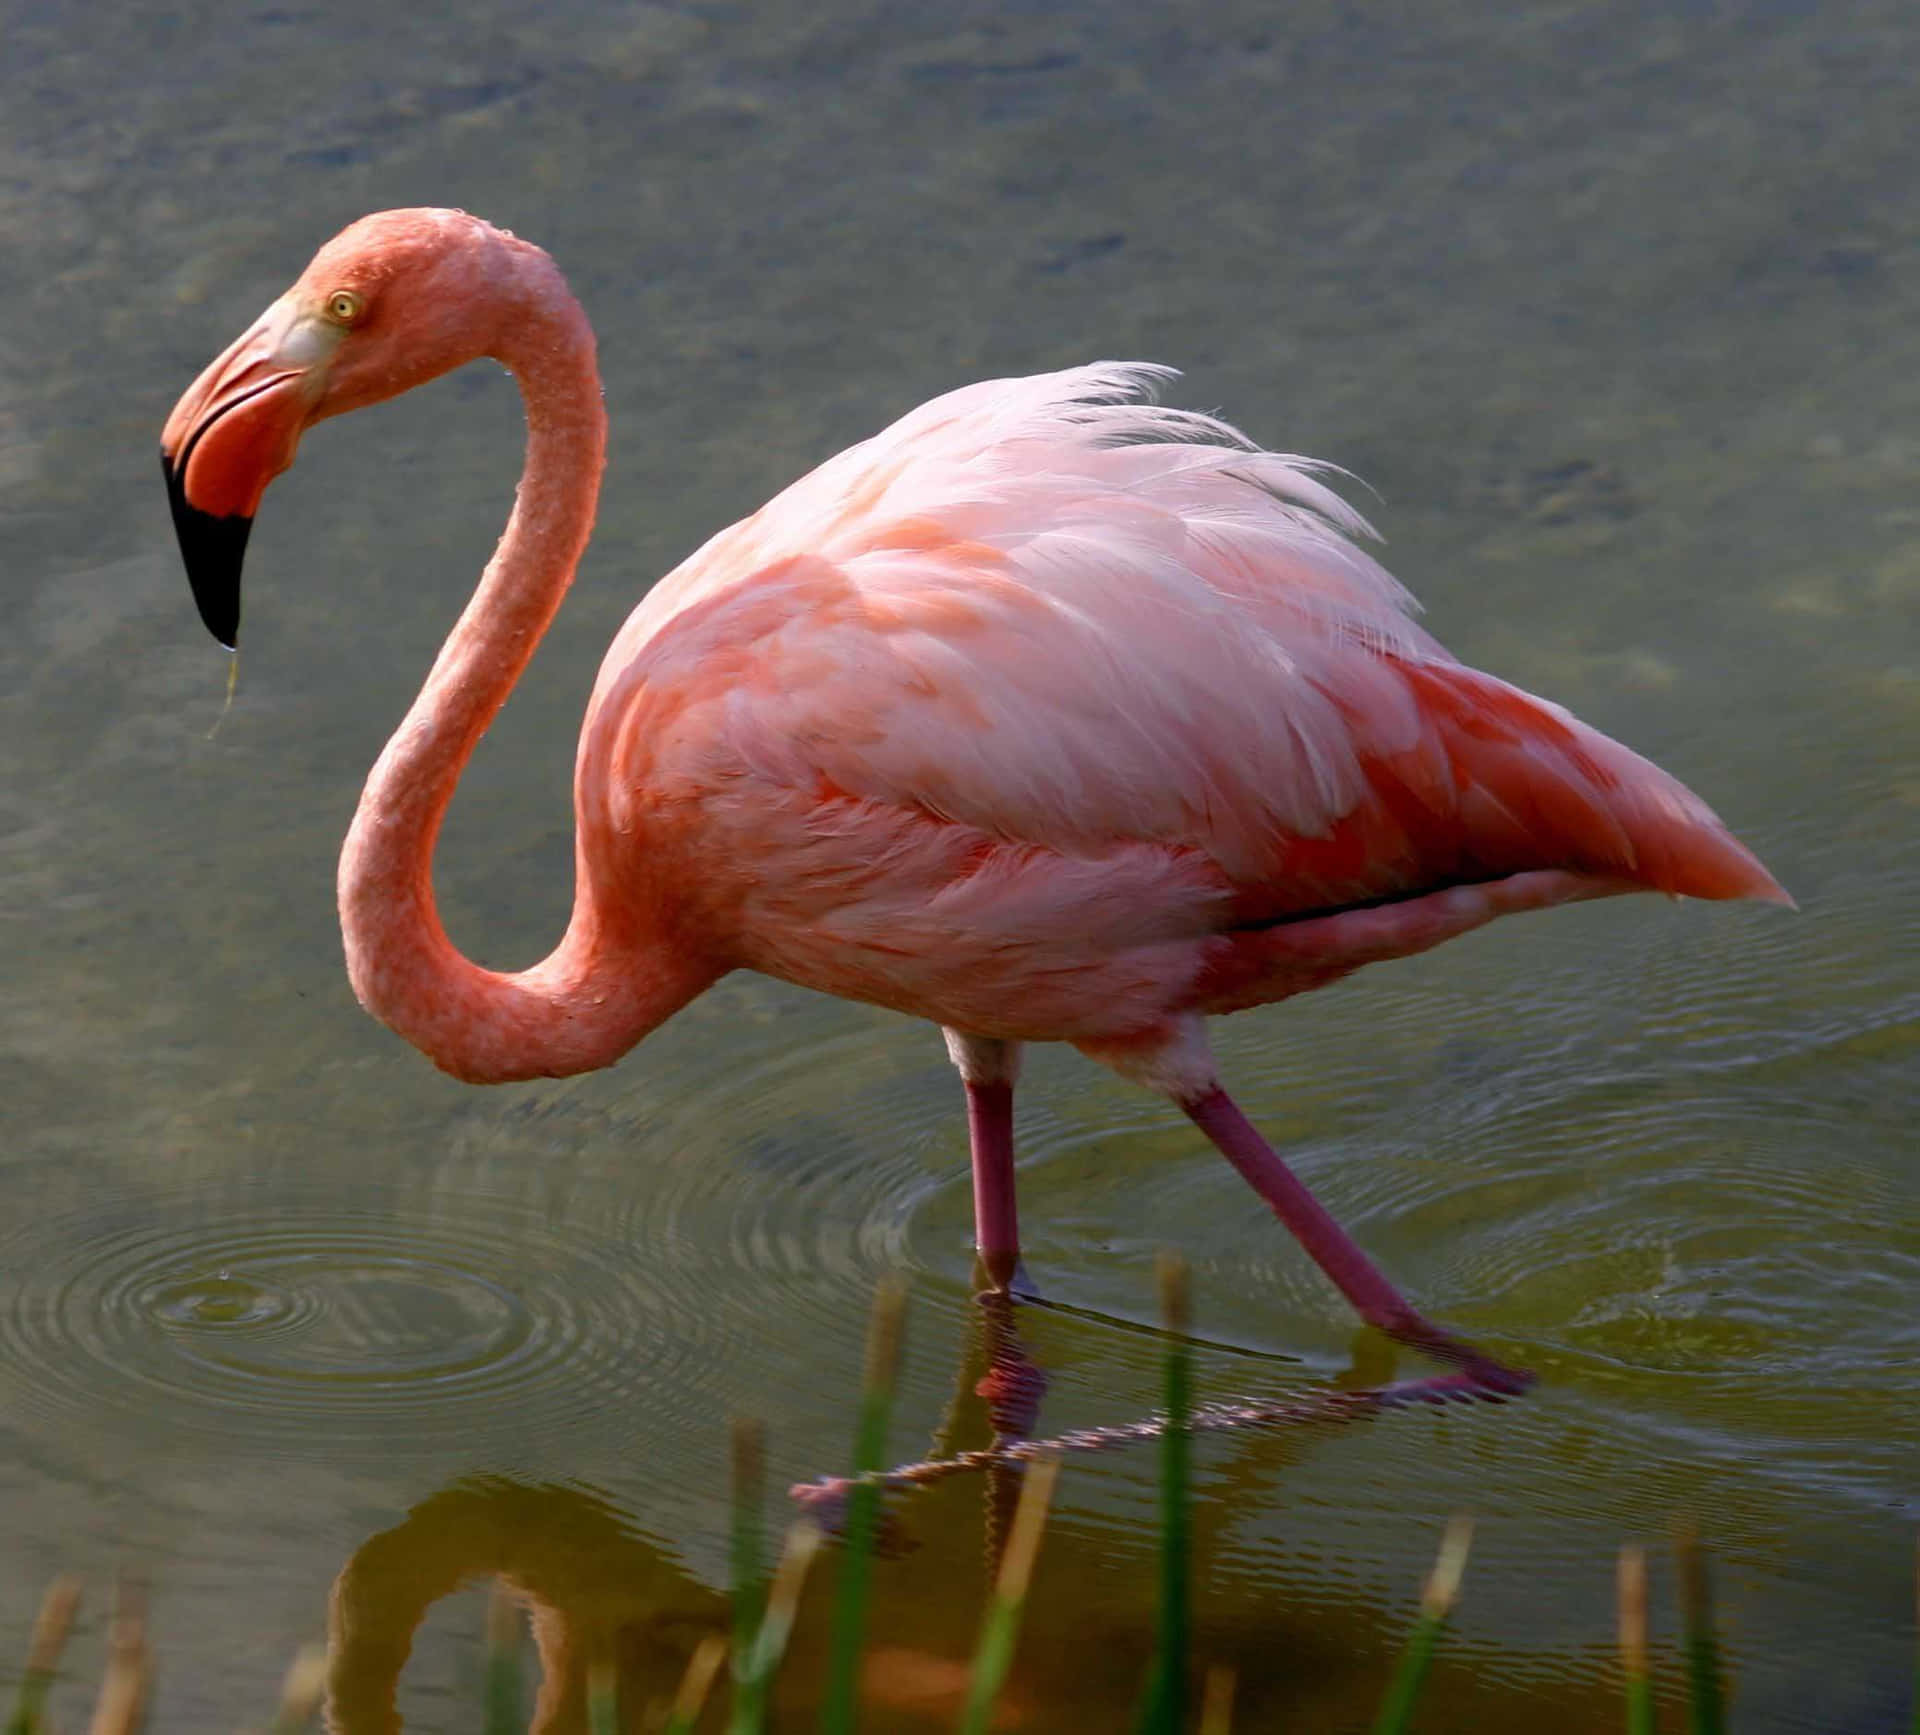 A Flamingo stands tall on one leg against a red sunset